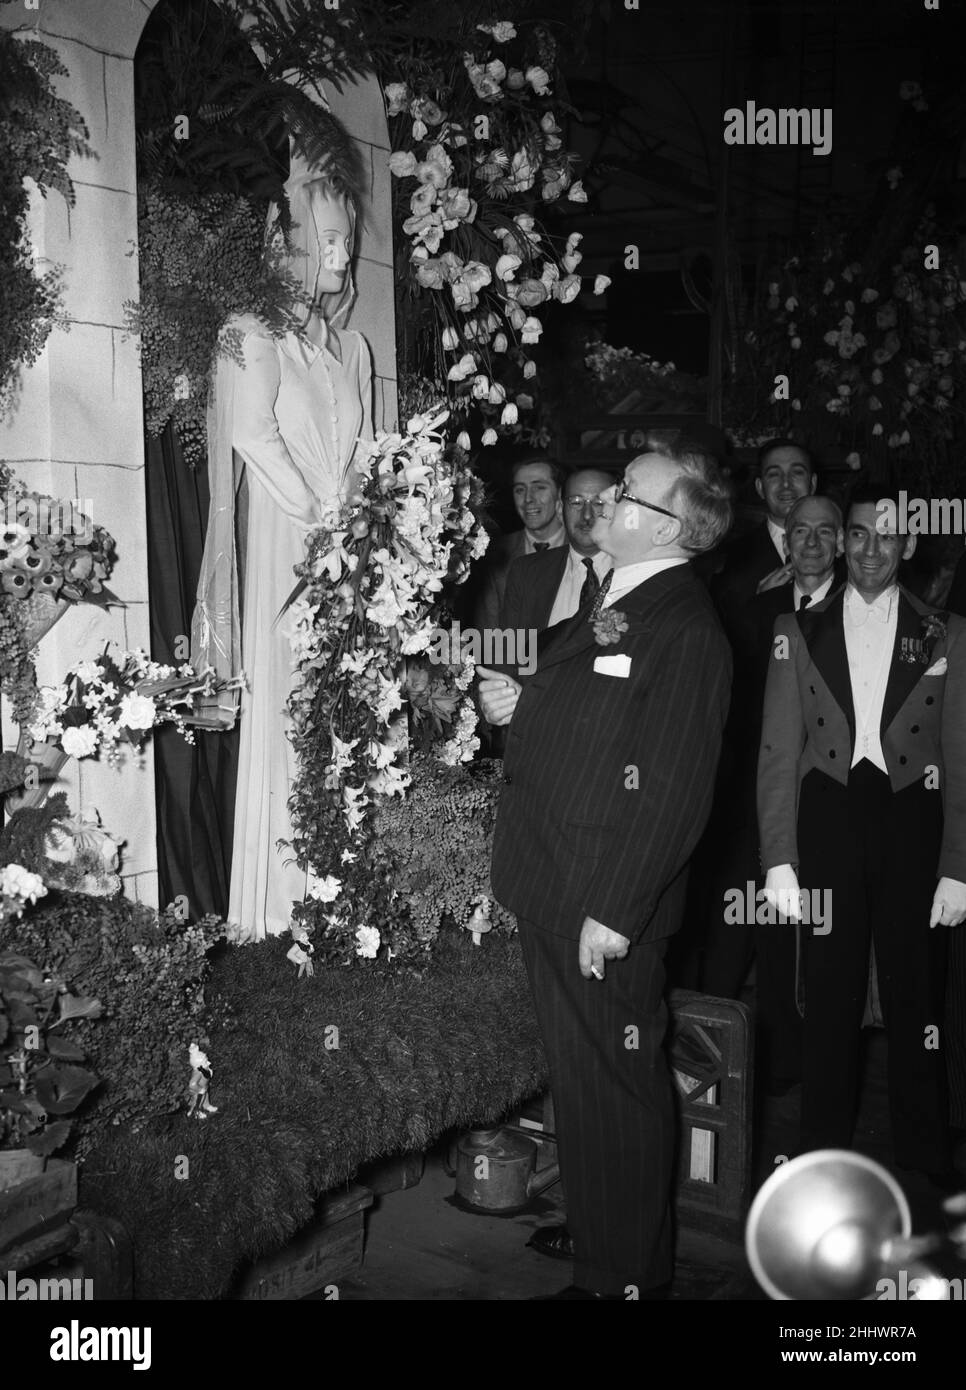 Covent Garden Flower Show 12th June 1951Herbert Morrison MP admires the floral display around the model of the goddess Flora at the opening of the Covent Garden Flower Show Stock Photo